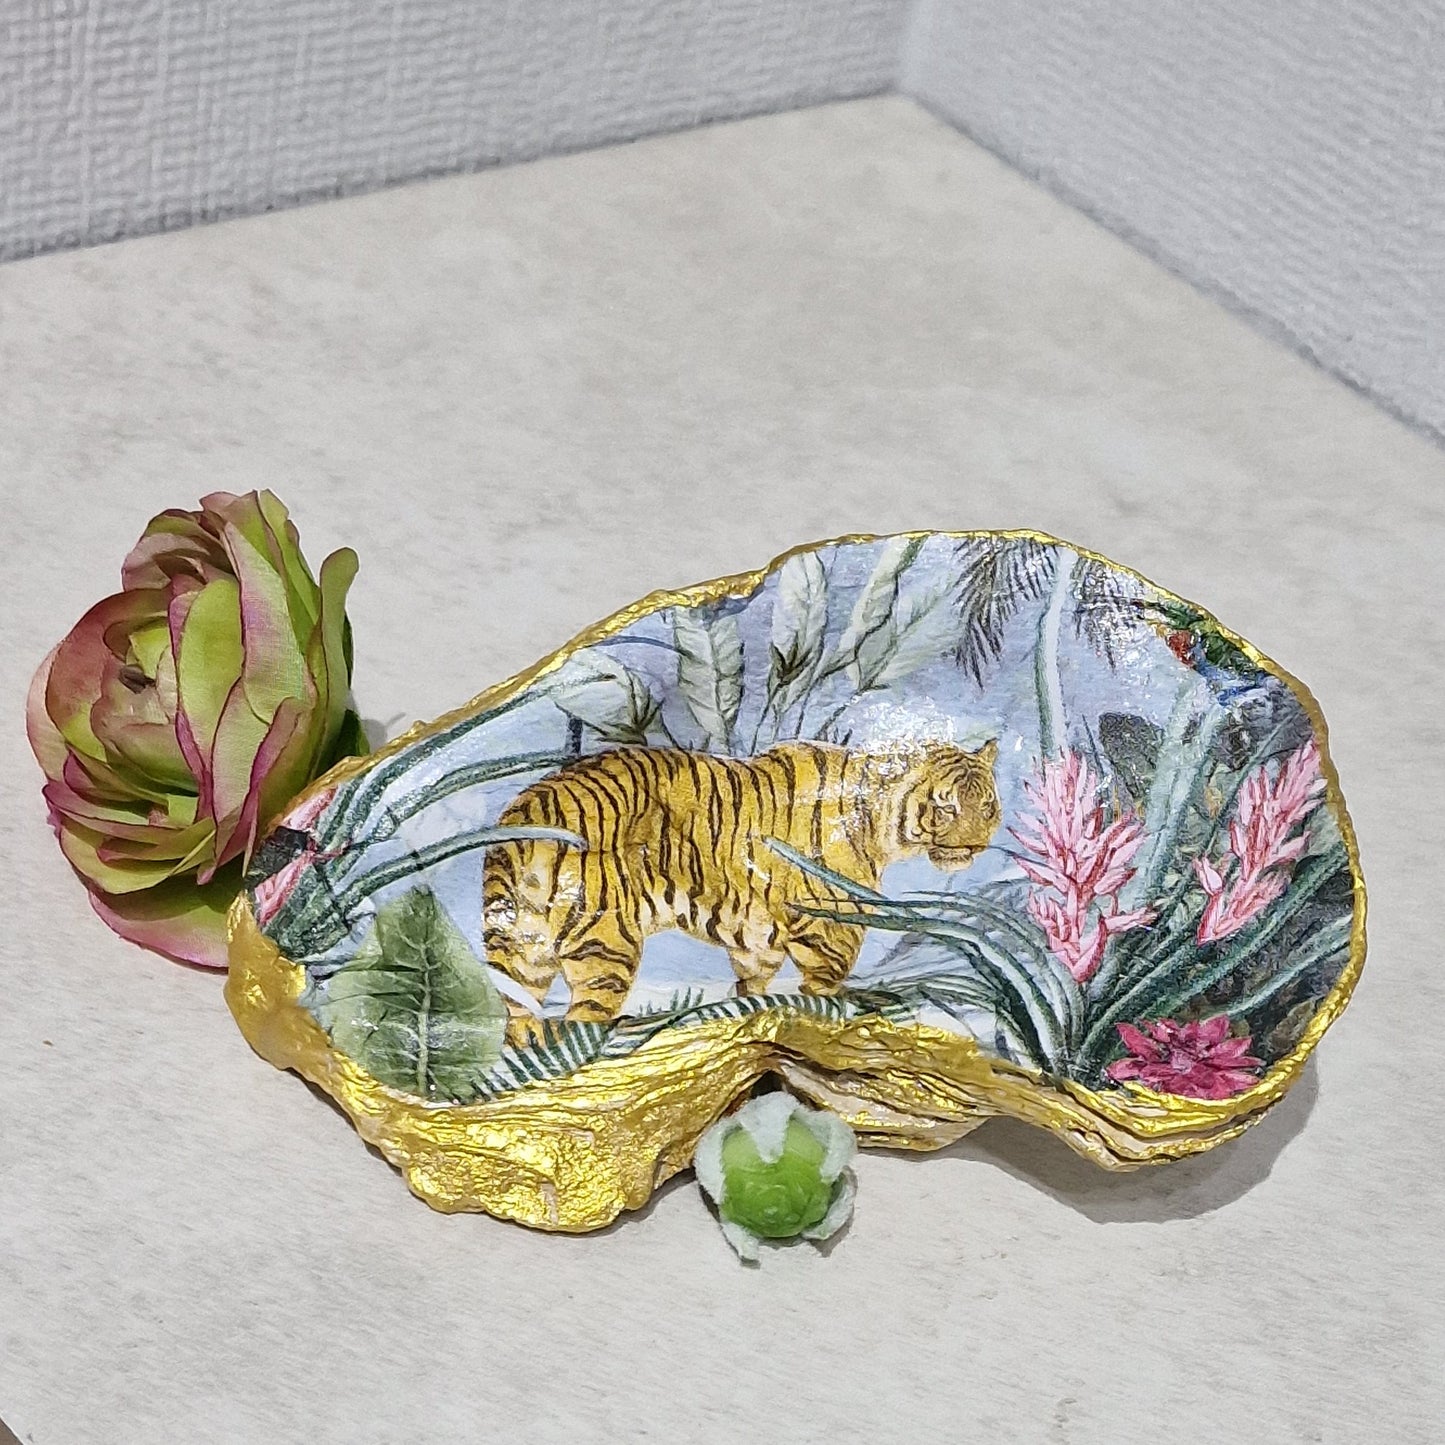 NEW Big Cats Tiger Oyster Shell Trinket Dish Gift